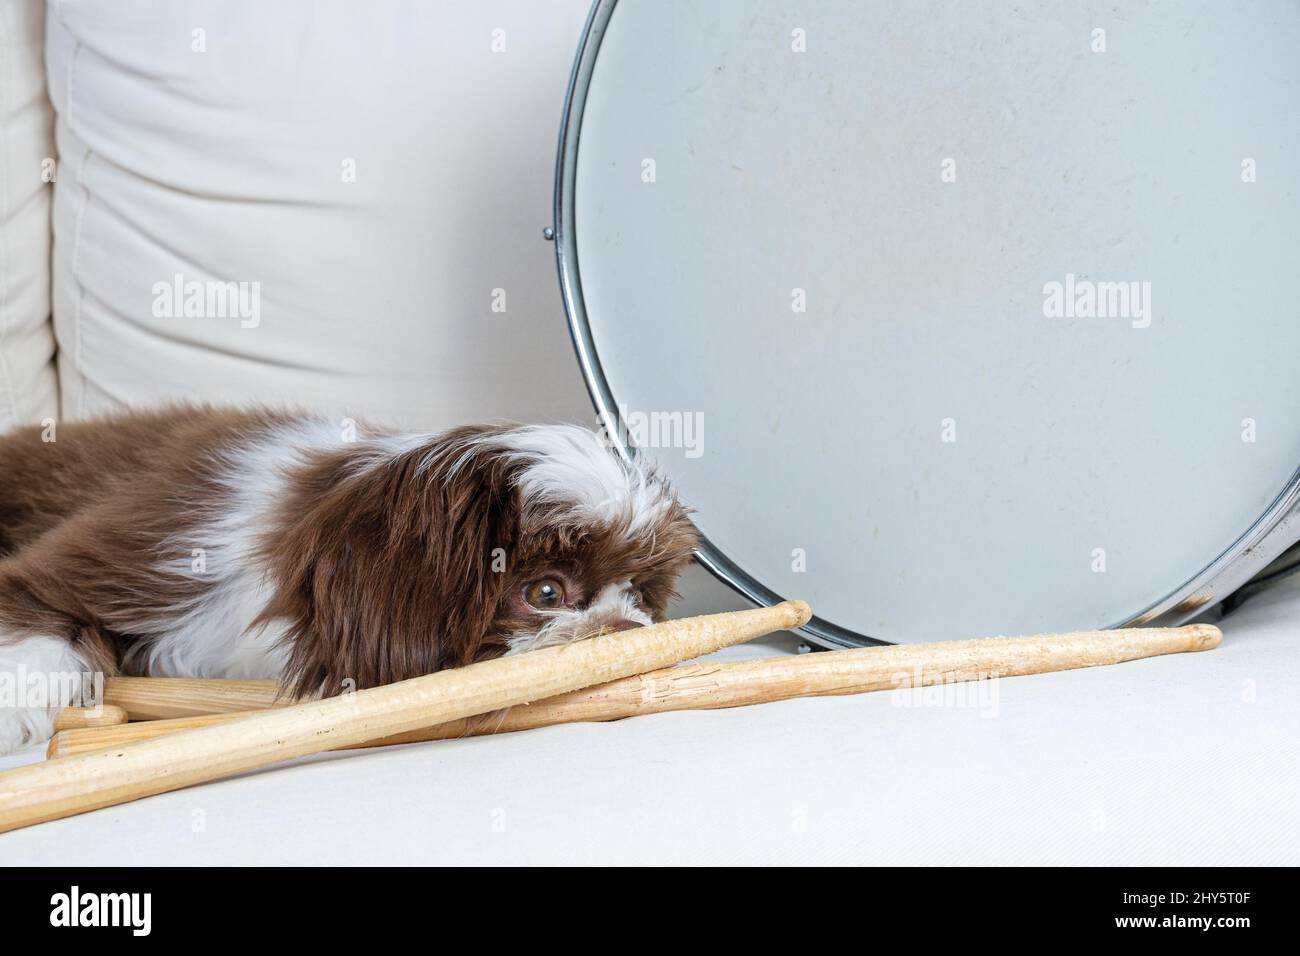 Closeup of shih tzu puppy lying down and watching drumsticks, next to drum snare. Stock Photo